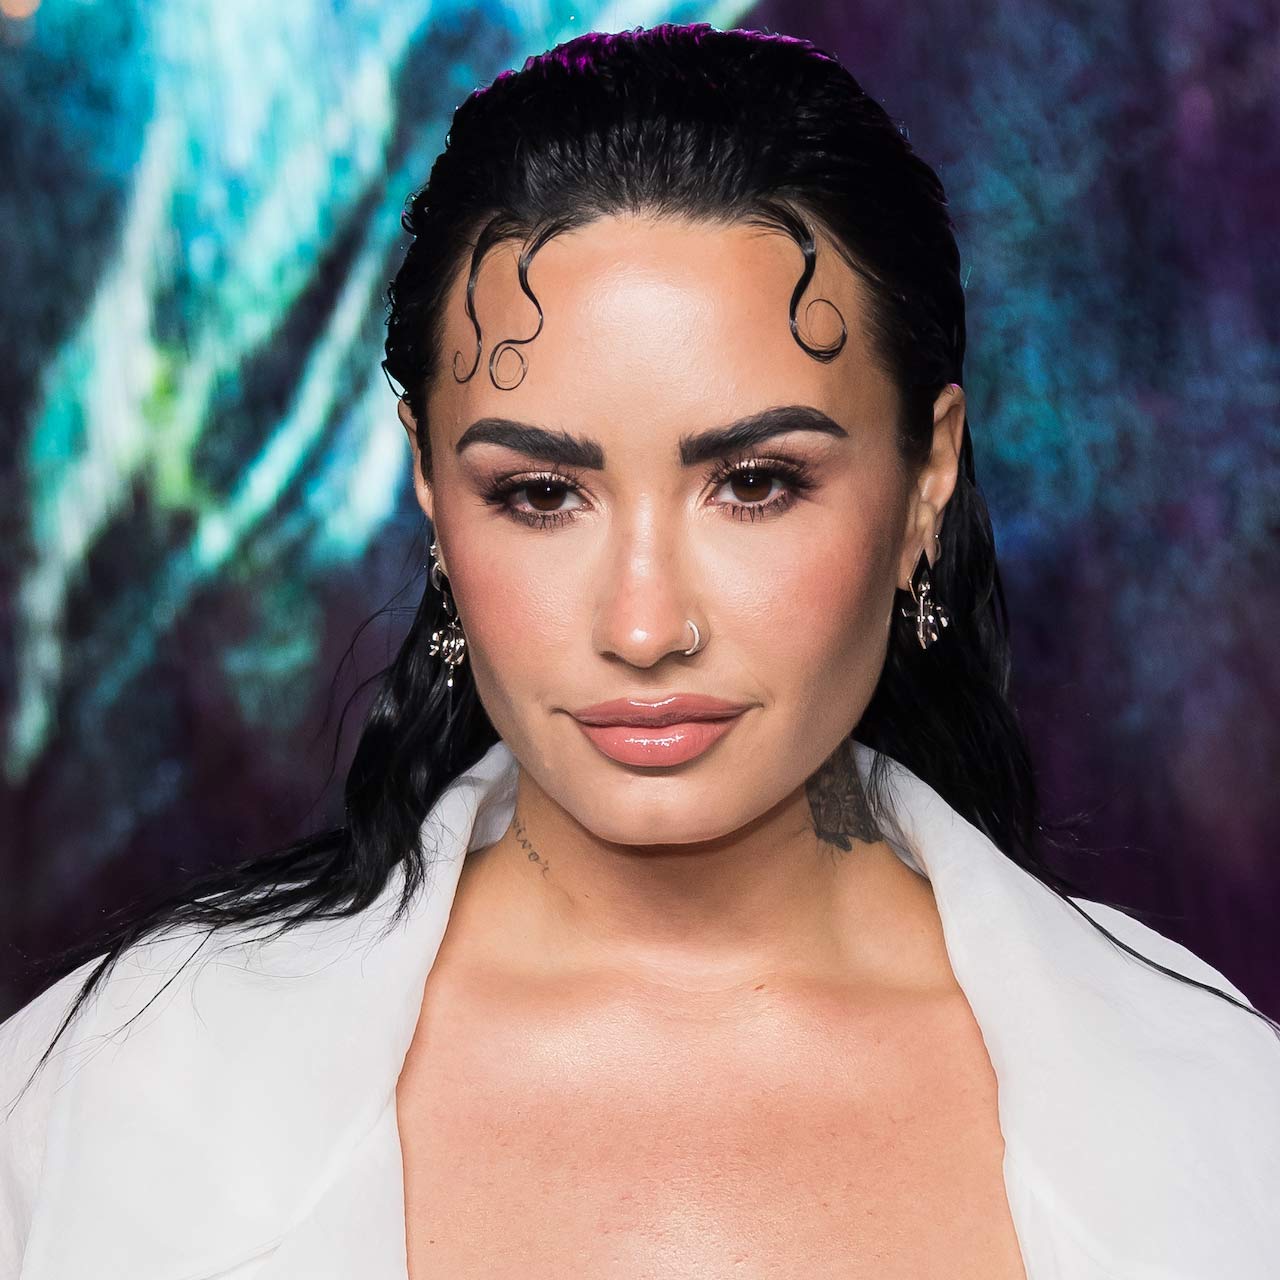 https://www.udiscovermusic.com/wp-content/uploads/2023/05/Demi-Lovato-GettyImages-1473826718.jpg